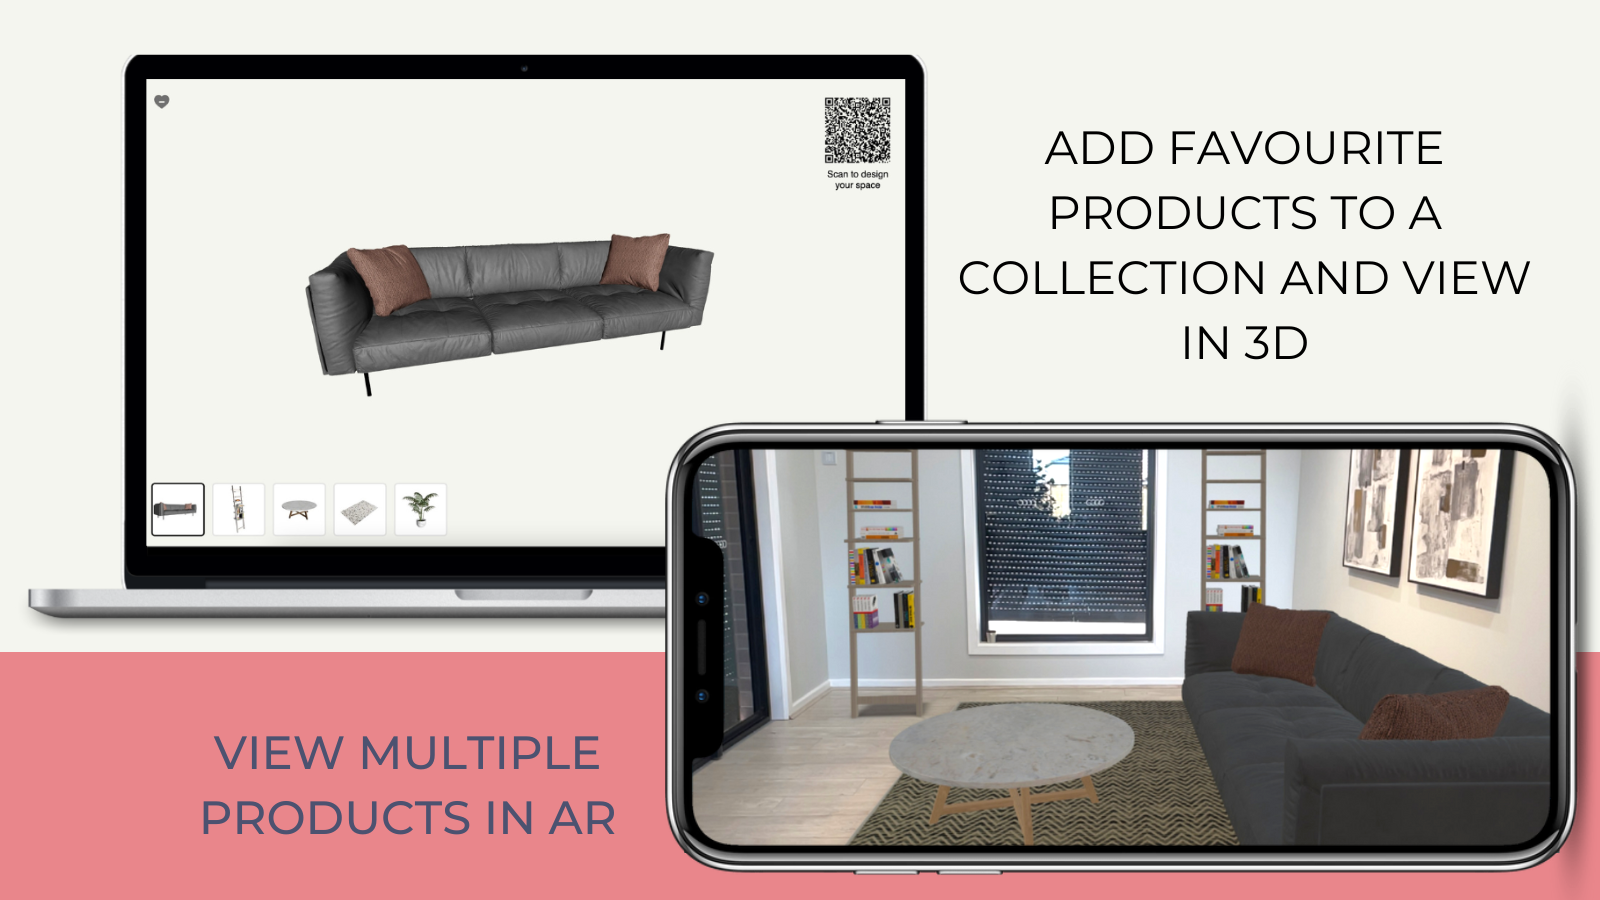 Collect and view multiple products in 3D and AR